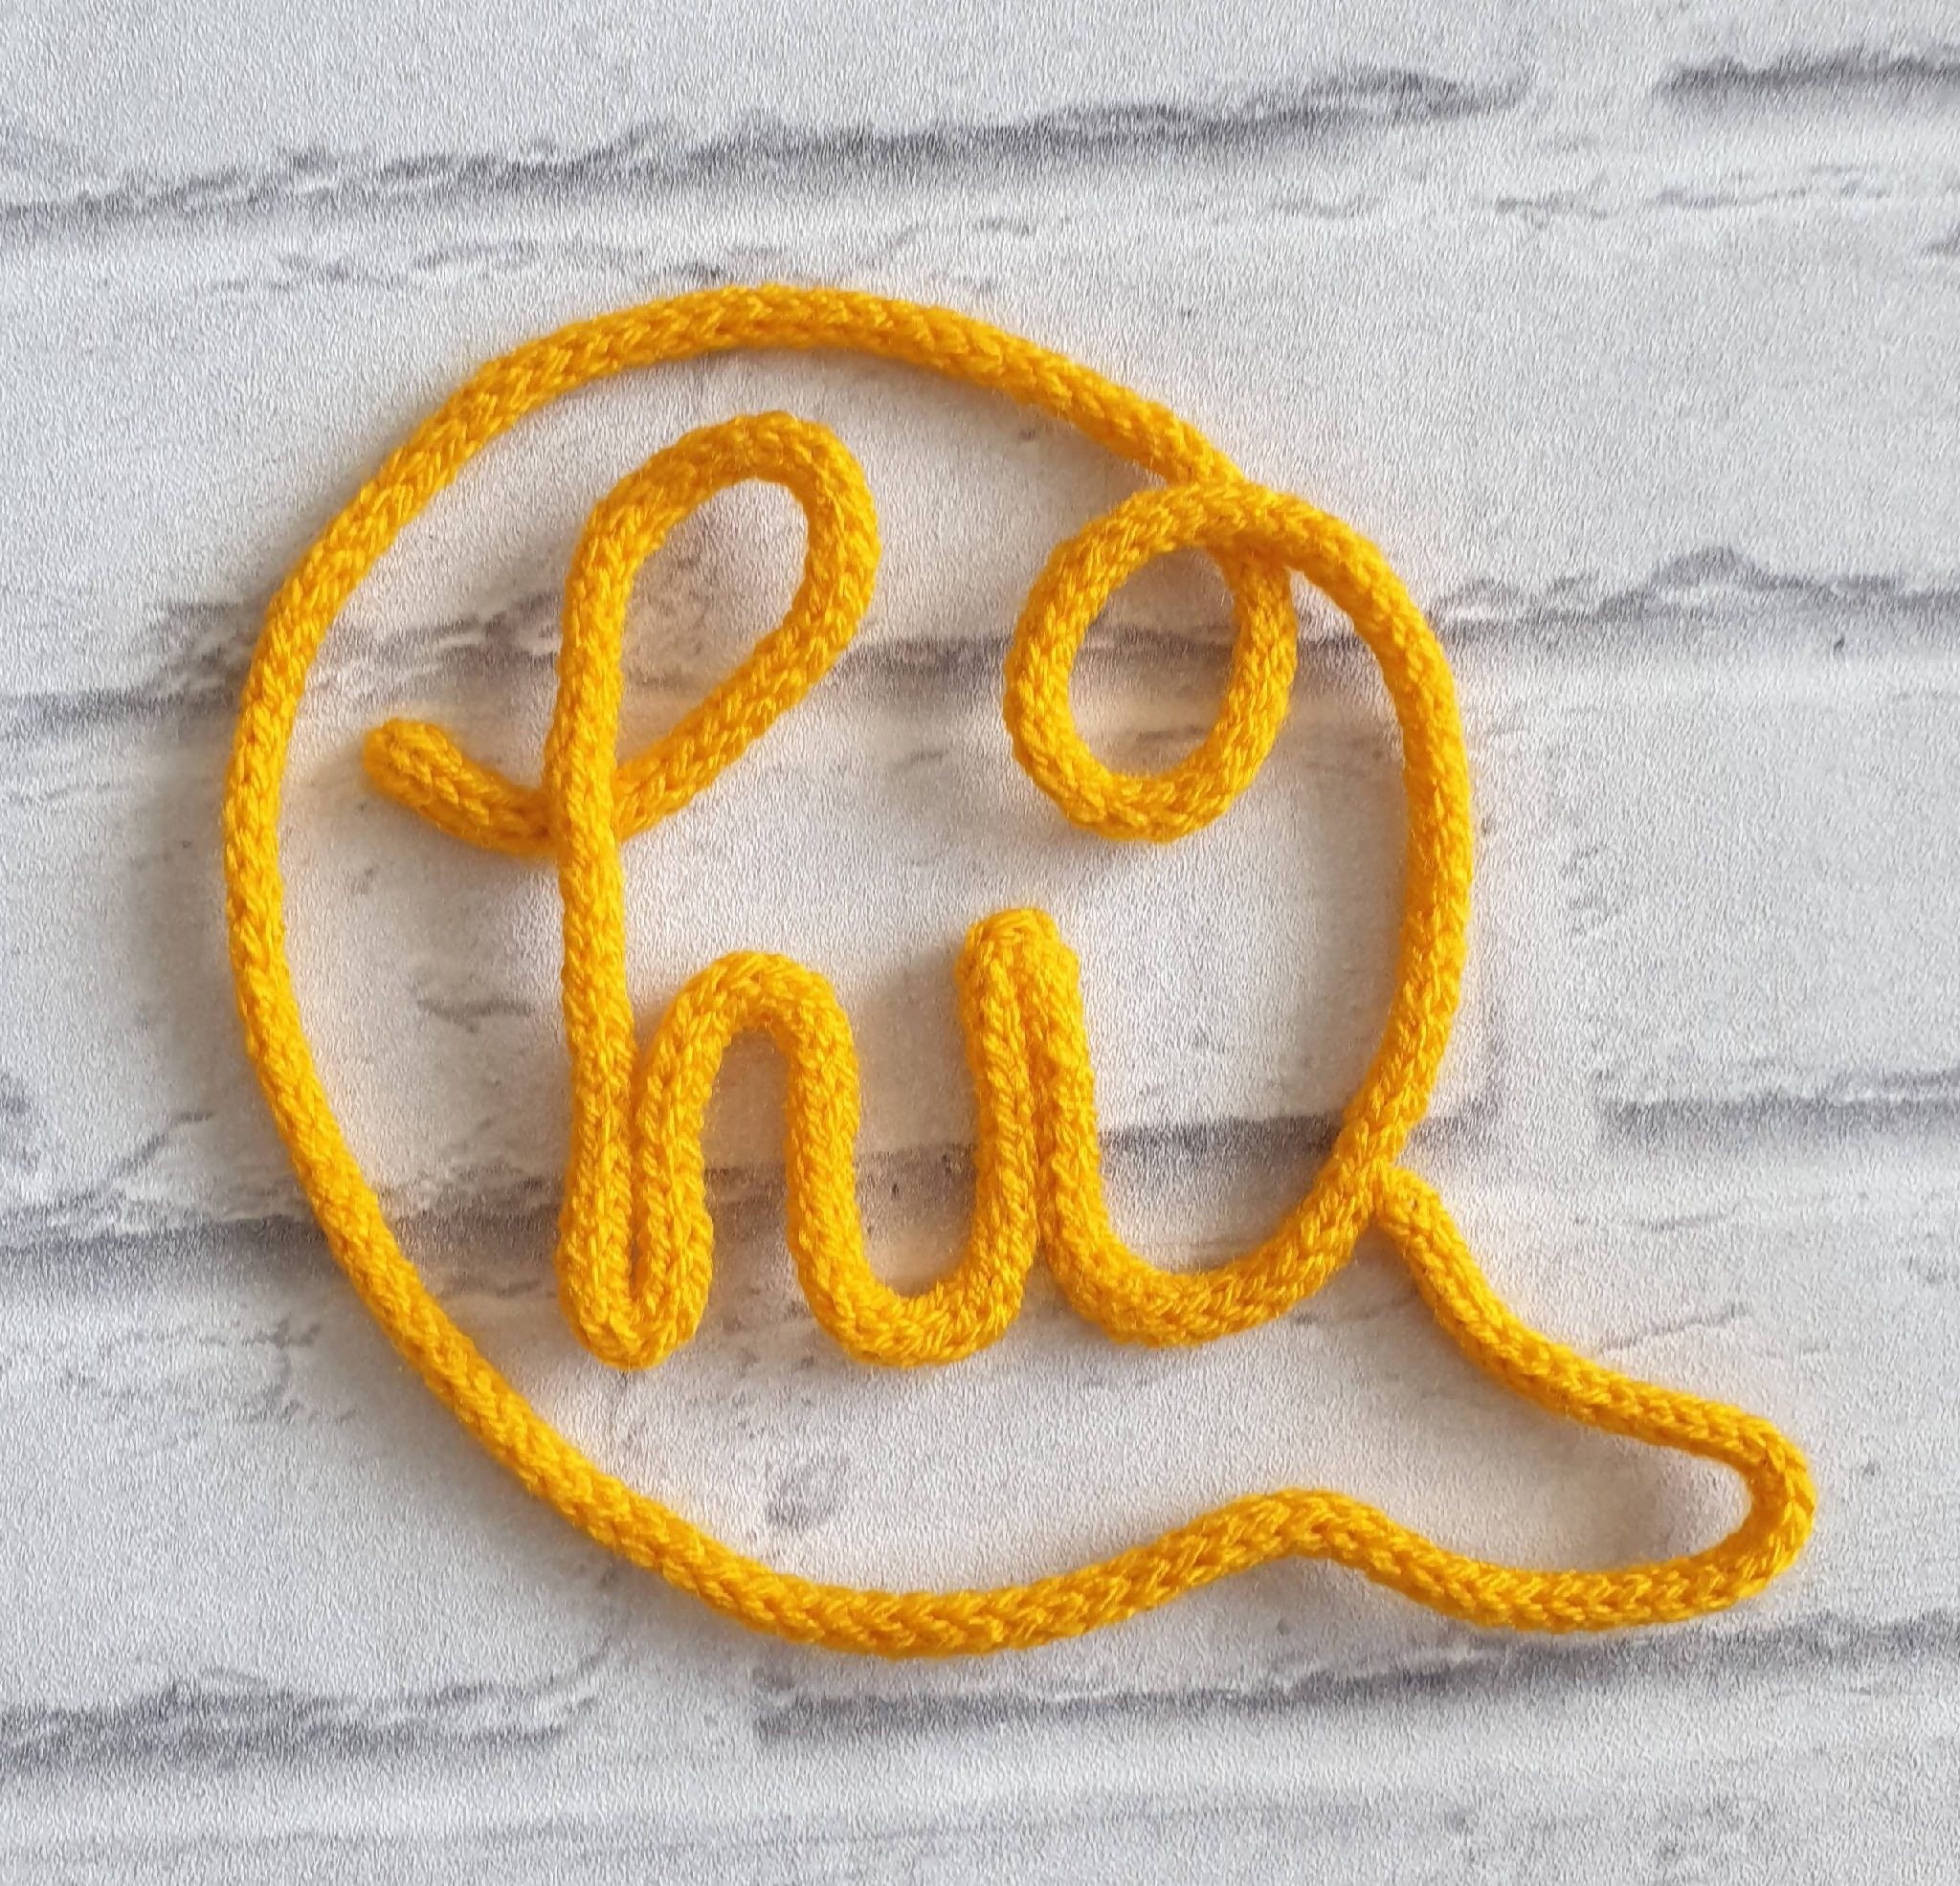 HI KNITTED WIRE WORD SIGN